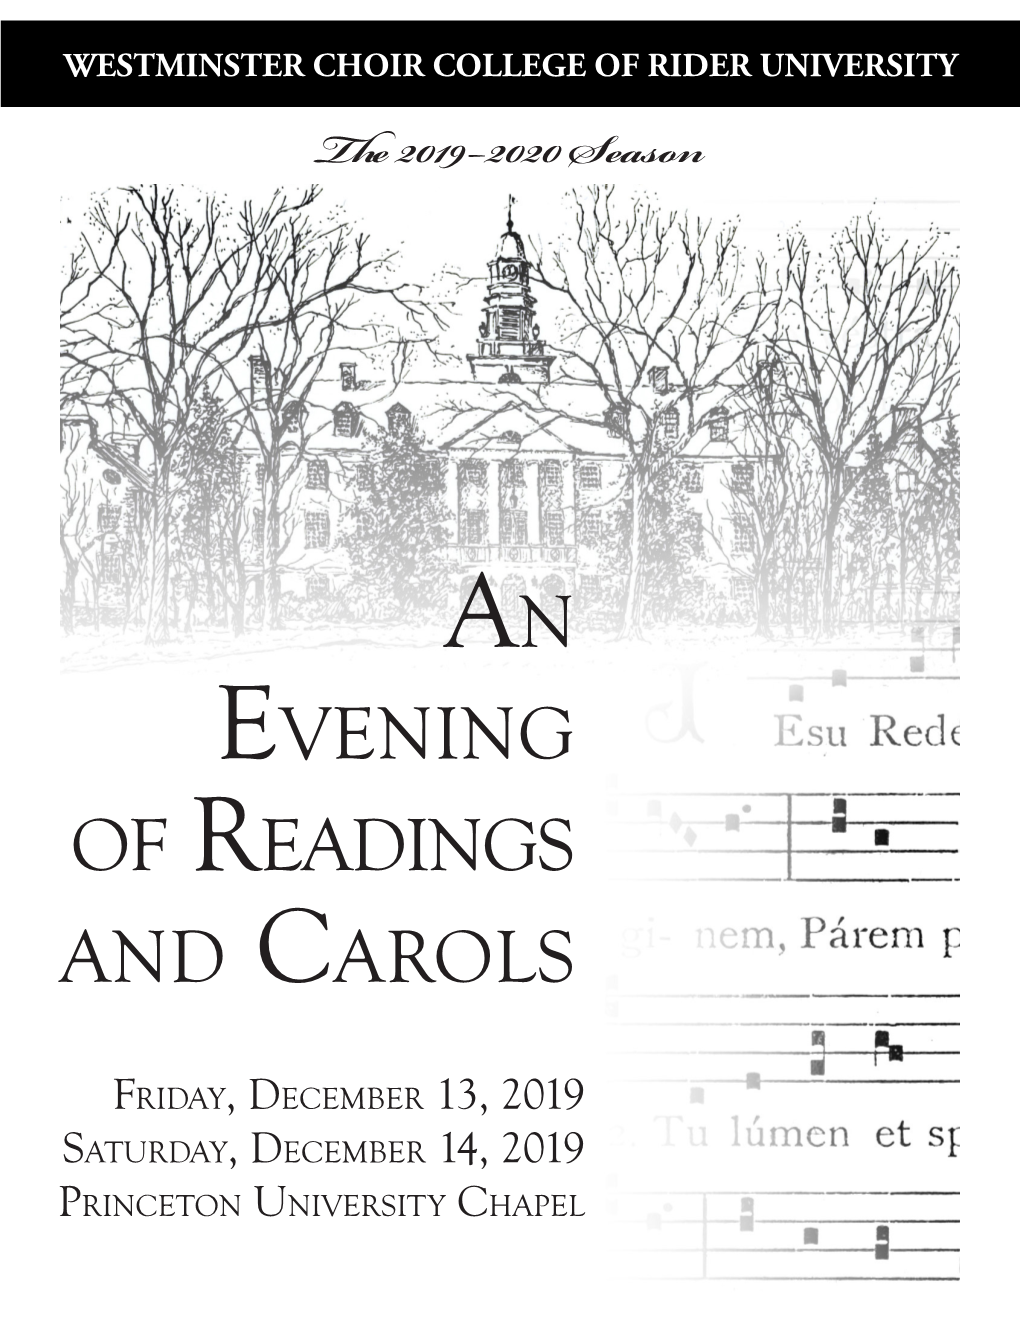 Evening of Readings and Carols